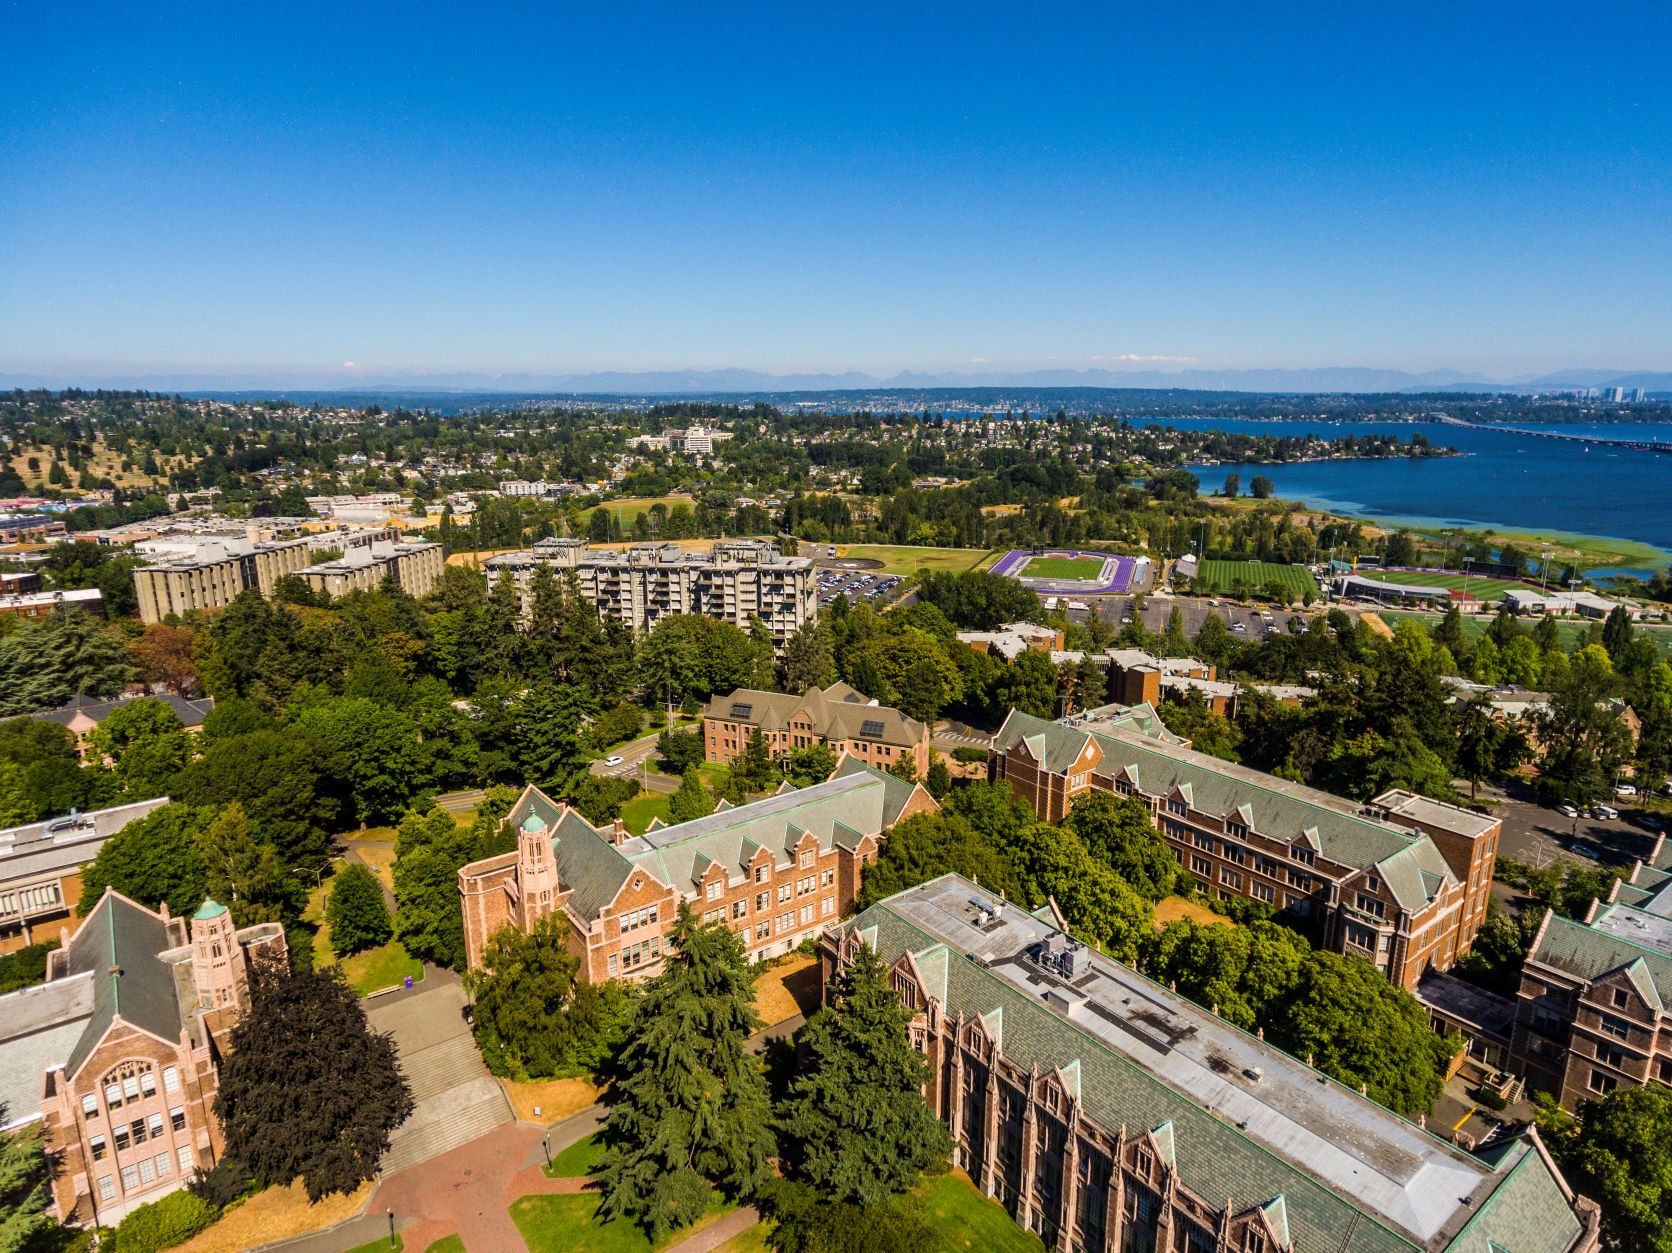 University of Washington Seattle one of the best universities in the world